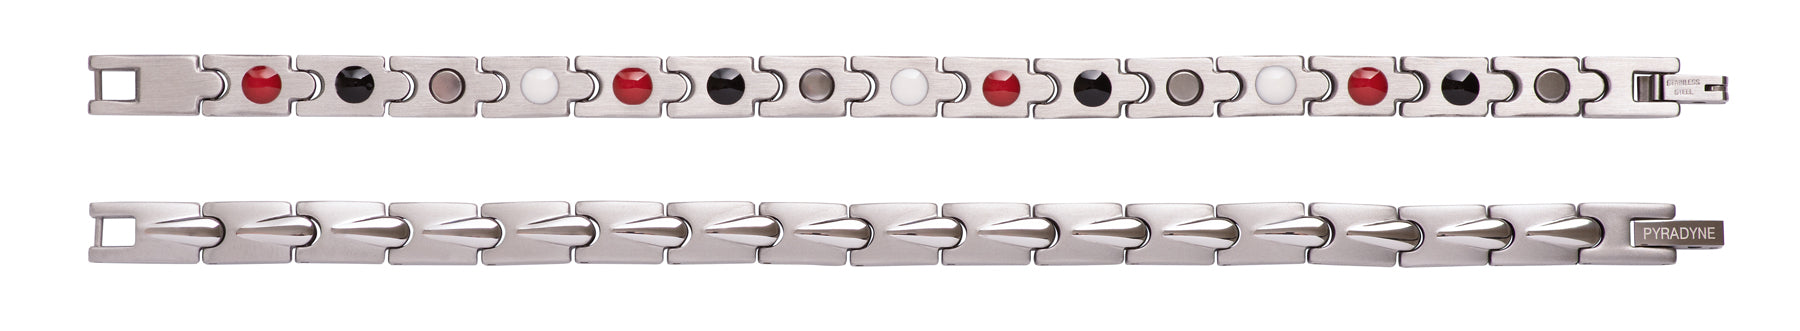 Energy Balance Bracelet Magnetic Bands  Keeps Your Body Normal  Pyradyne